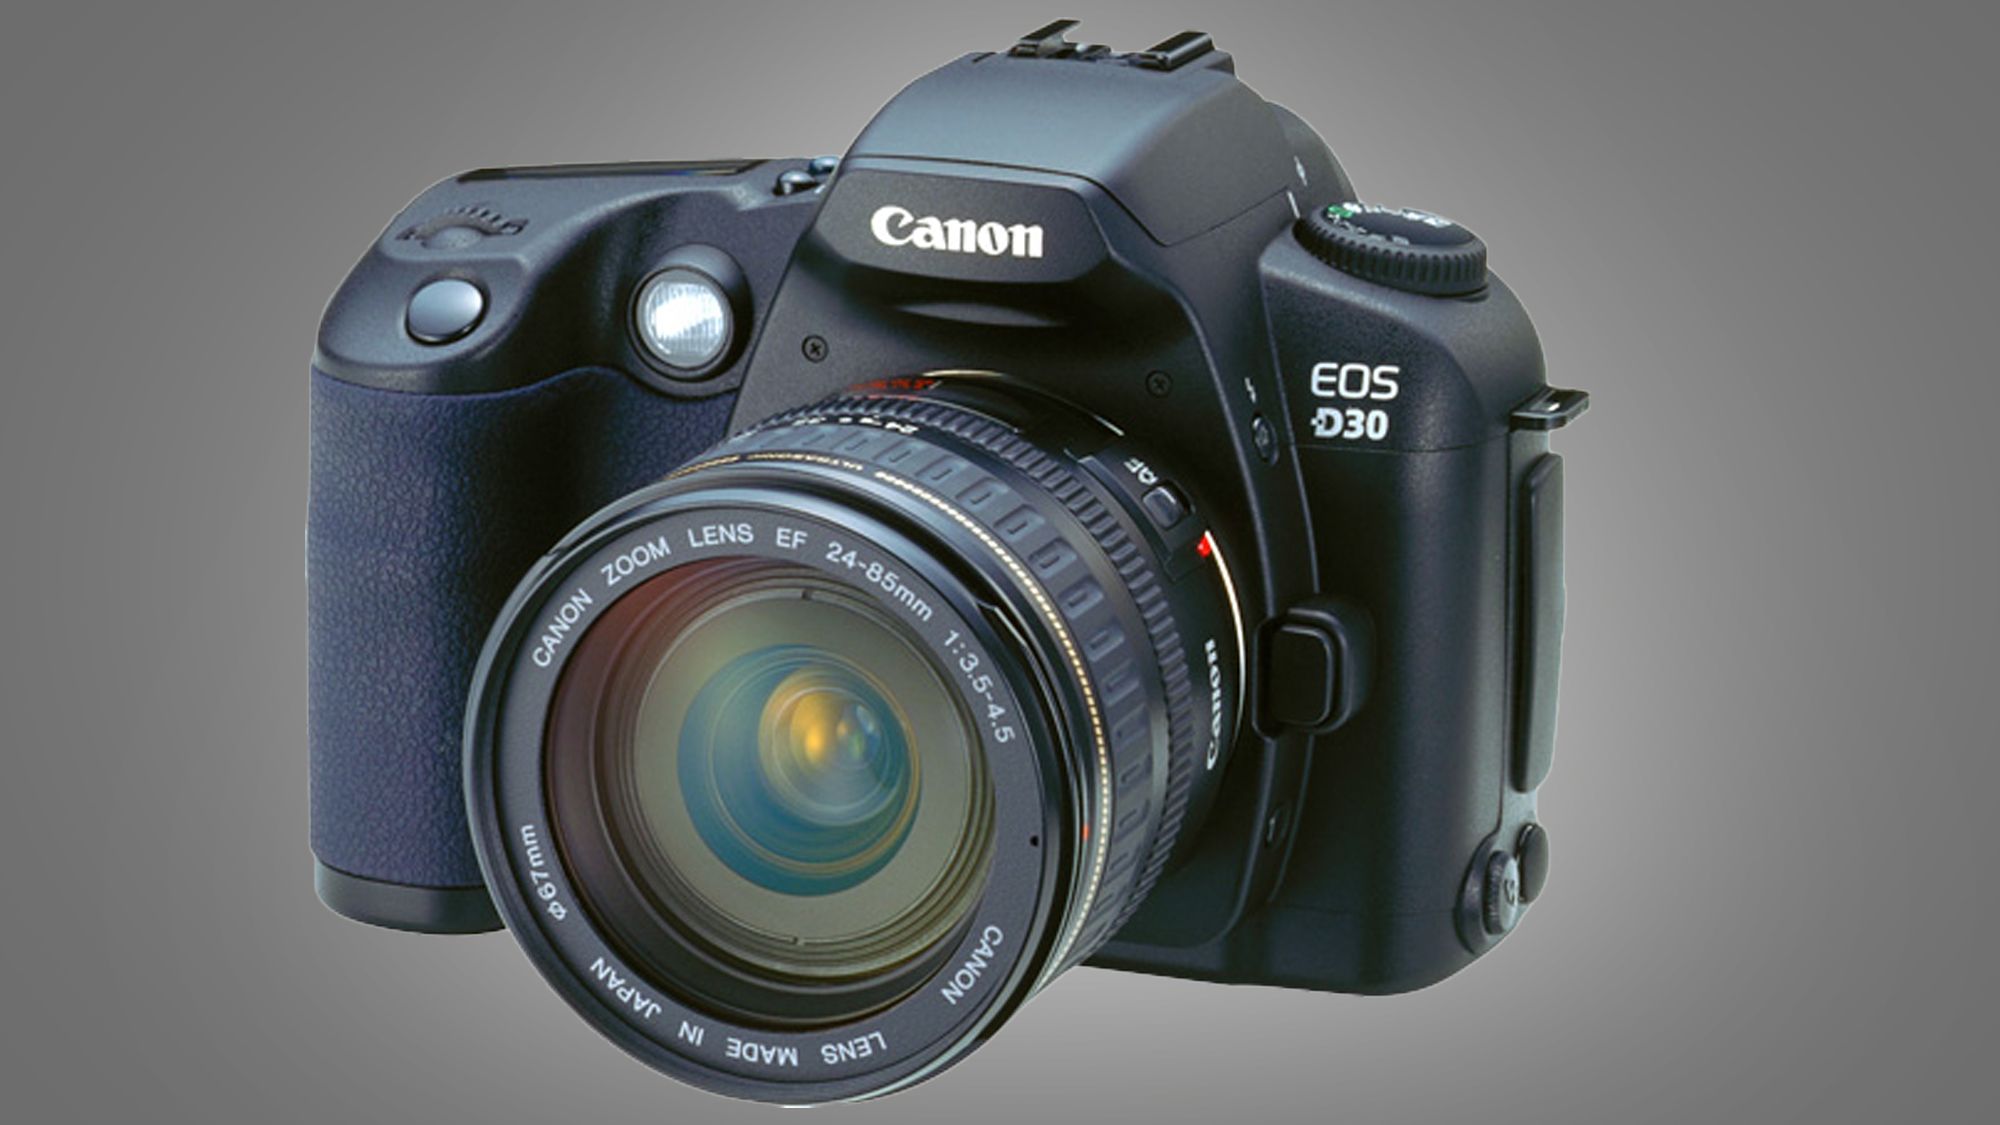 The Canon D30 camera on a grey background